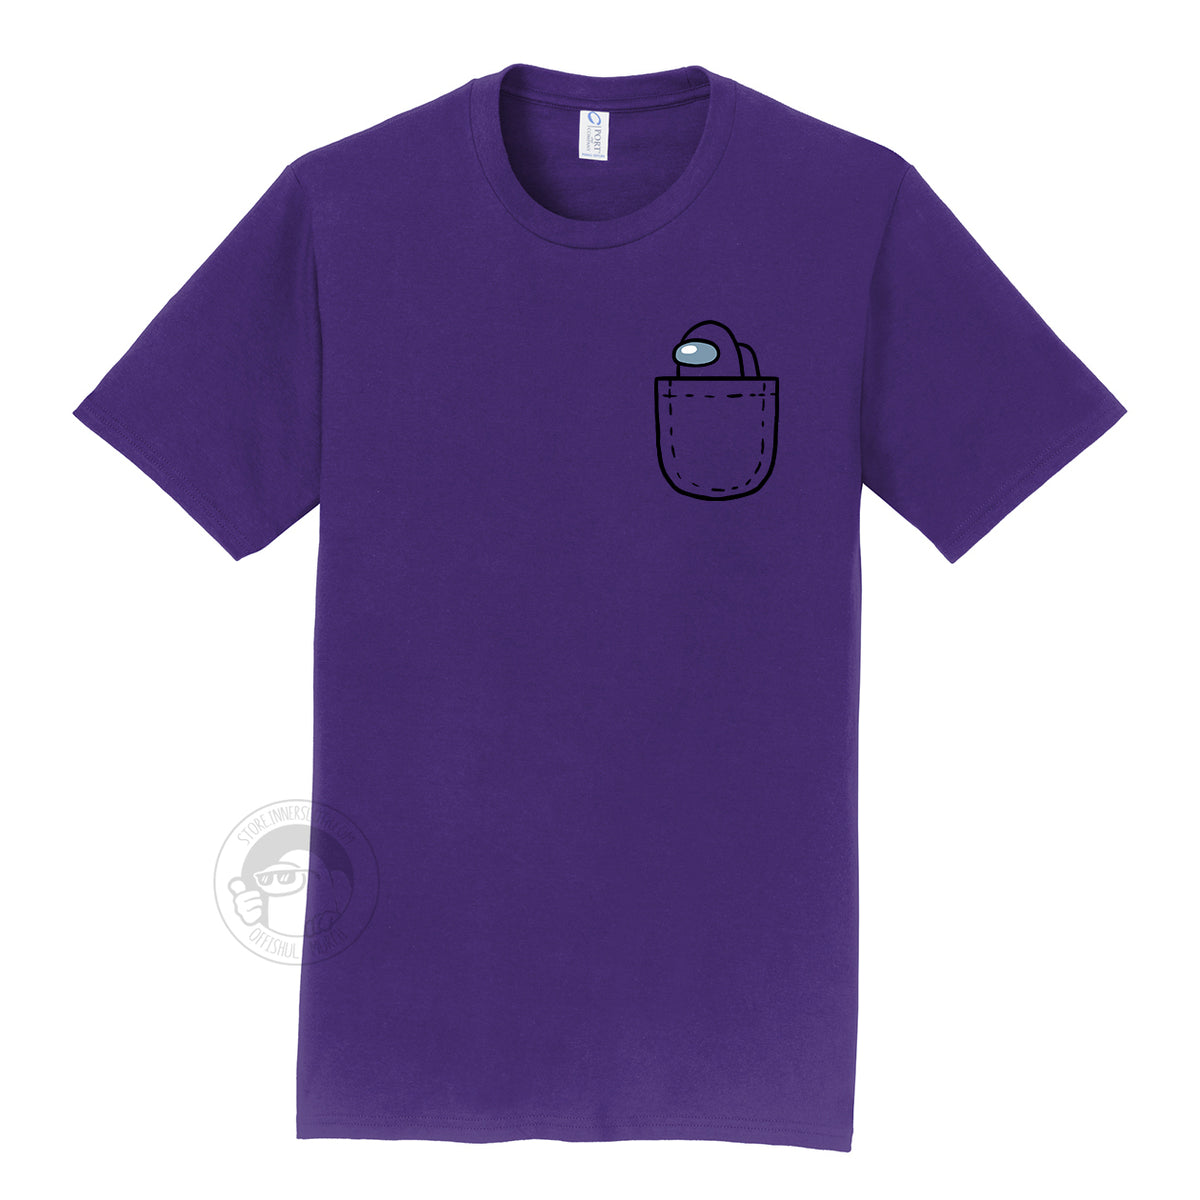 A product photograph of the Among Us: Mini Crewmate Pocket Tee in purple. The shirt art depicts a fake pocket and a small crewmate peeking out of it. The crewmate is the same color as the rest of the shirt.